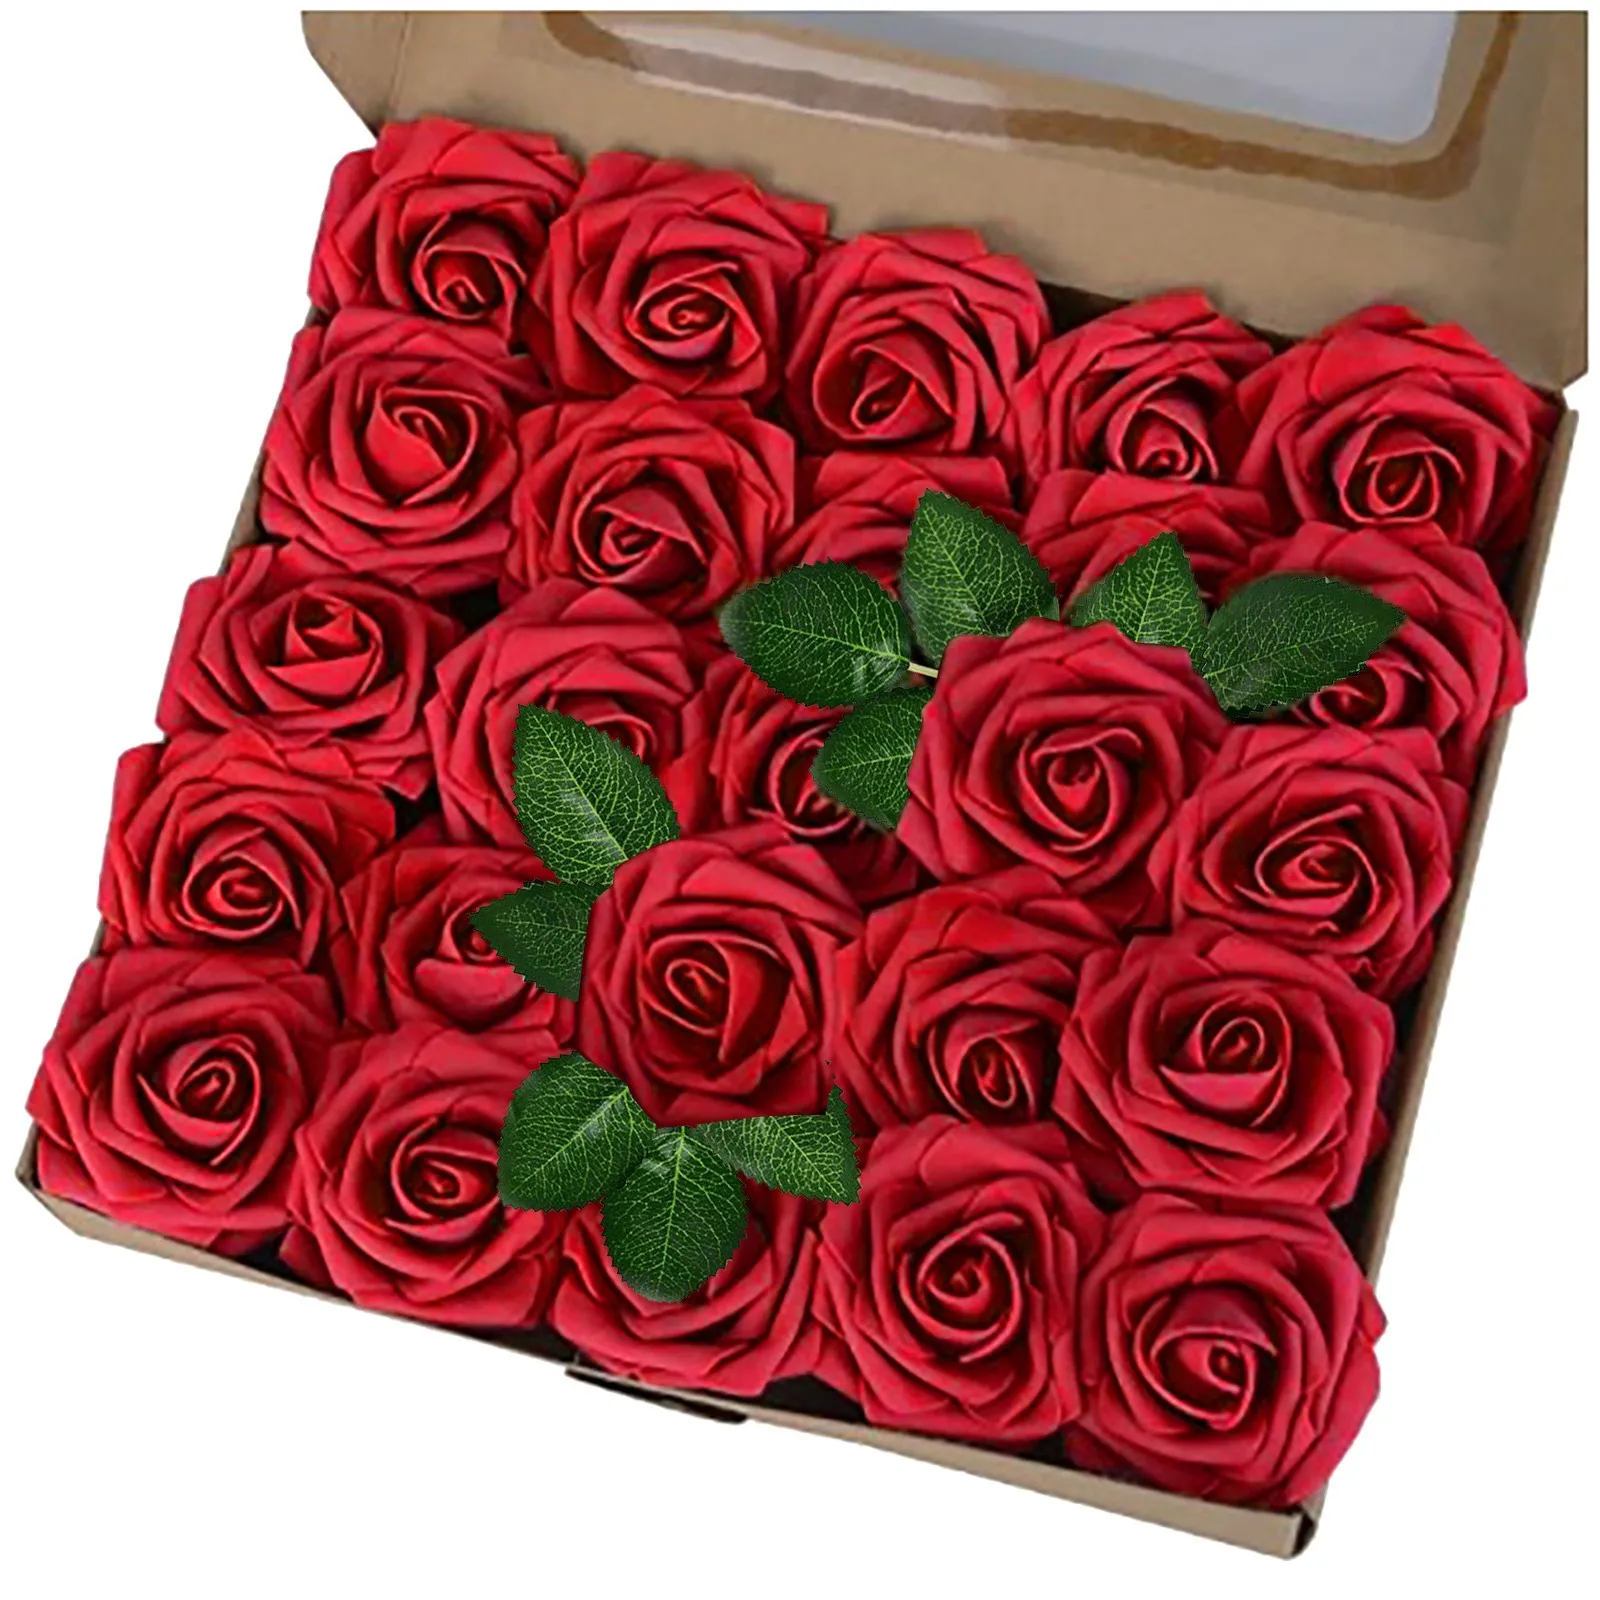 25pcs/lot Rose Foam Fake Flower Floral Scented Rose Flower Essential  Wedding Valentine's Day Gift Holding Flowers Valentines Day - AliExpress  Nhà & vườn